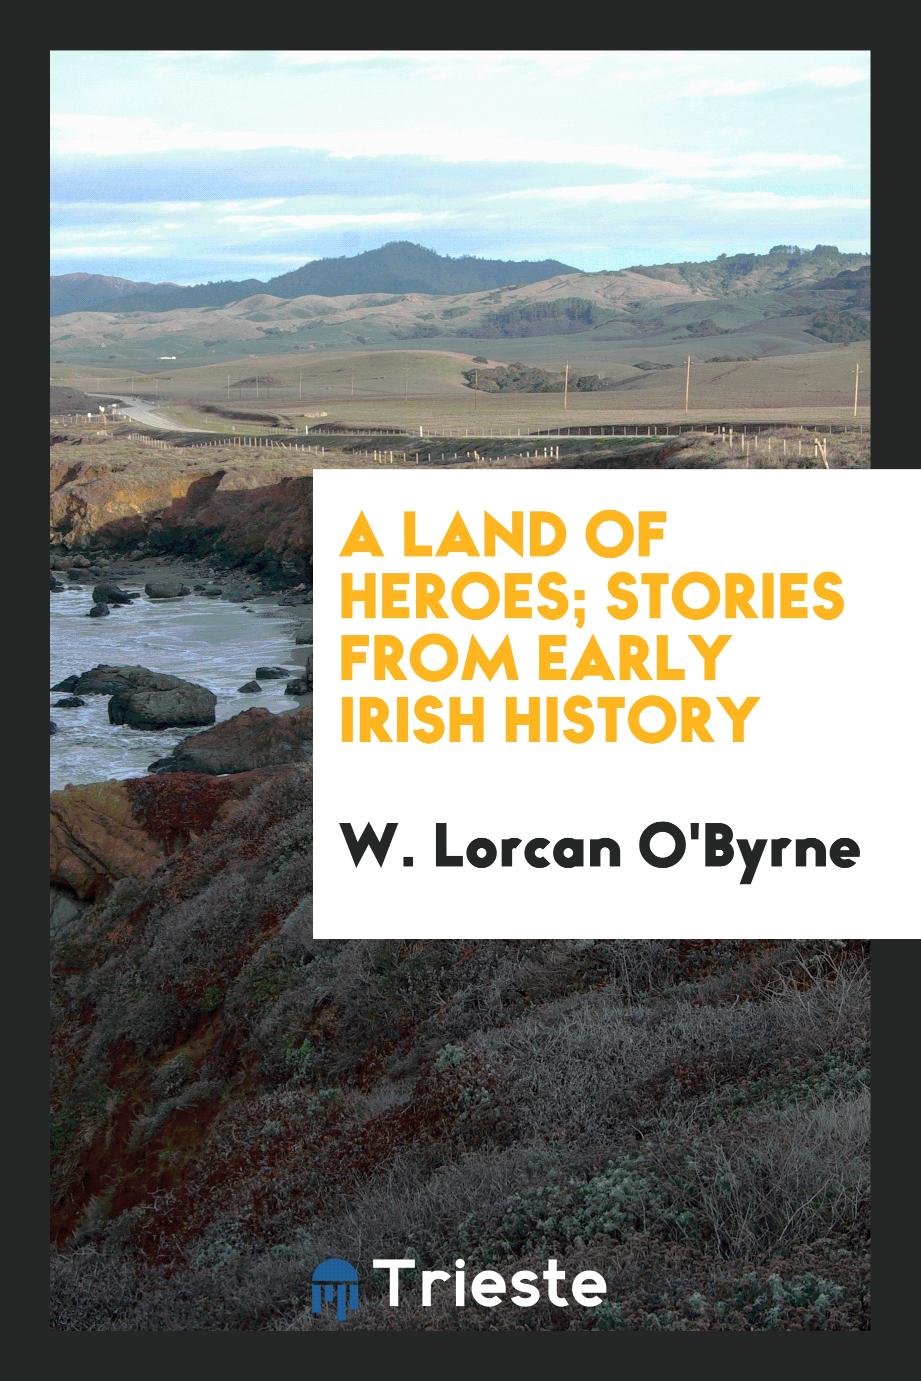 A land of heroes; stories from early Irish history